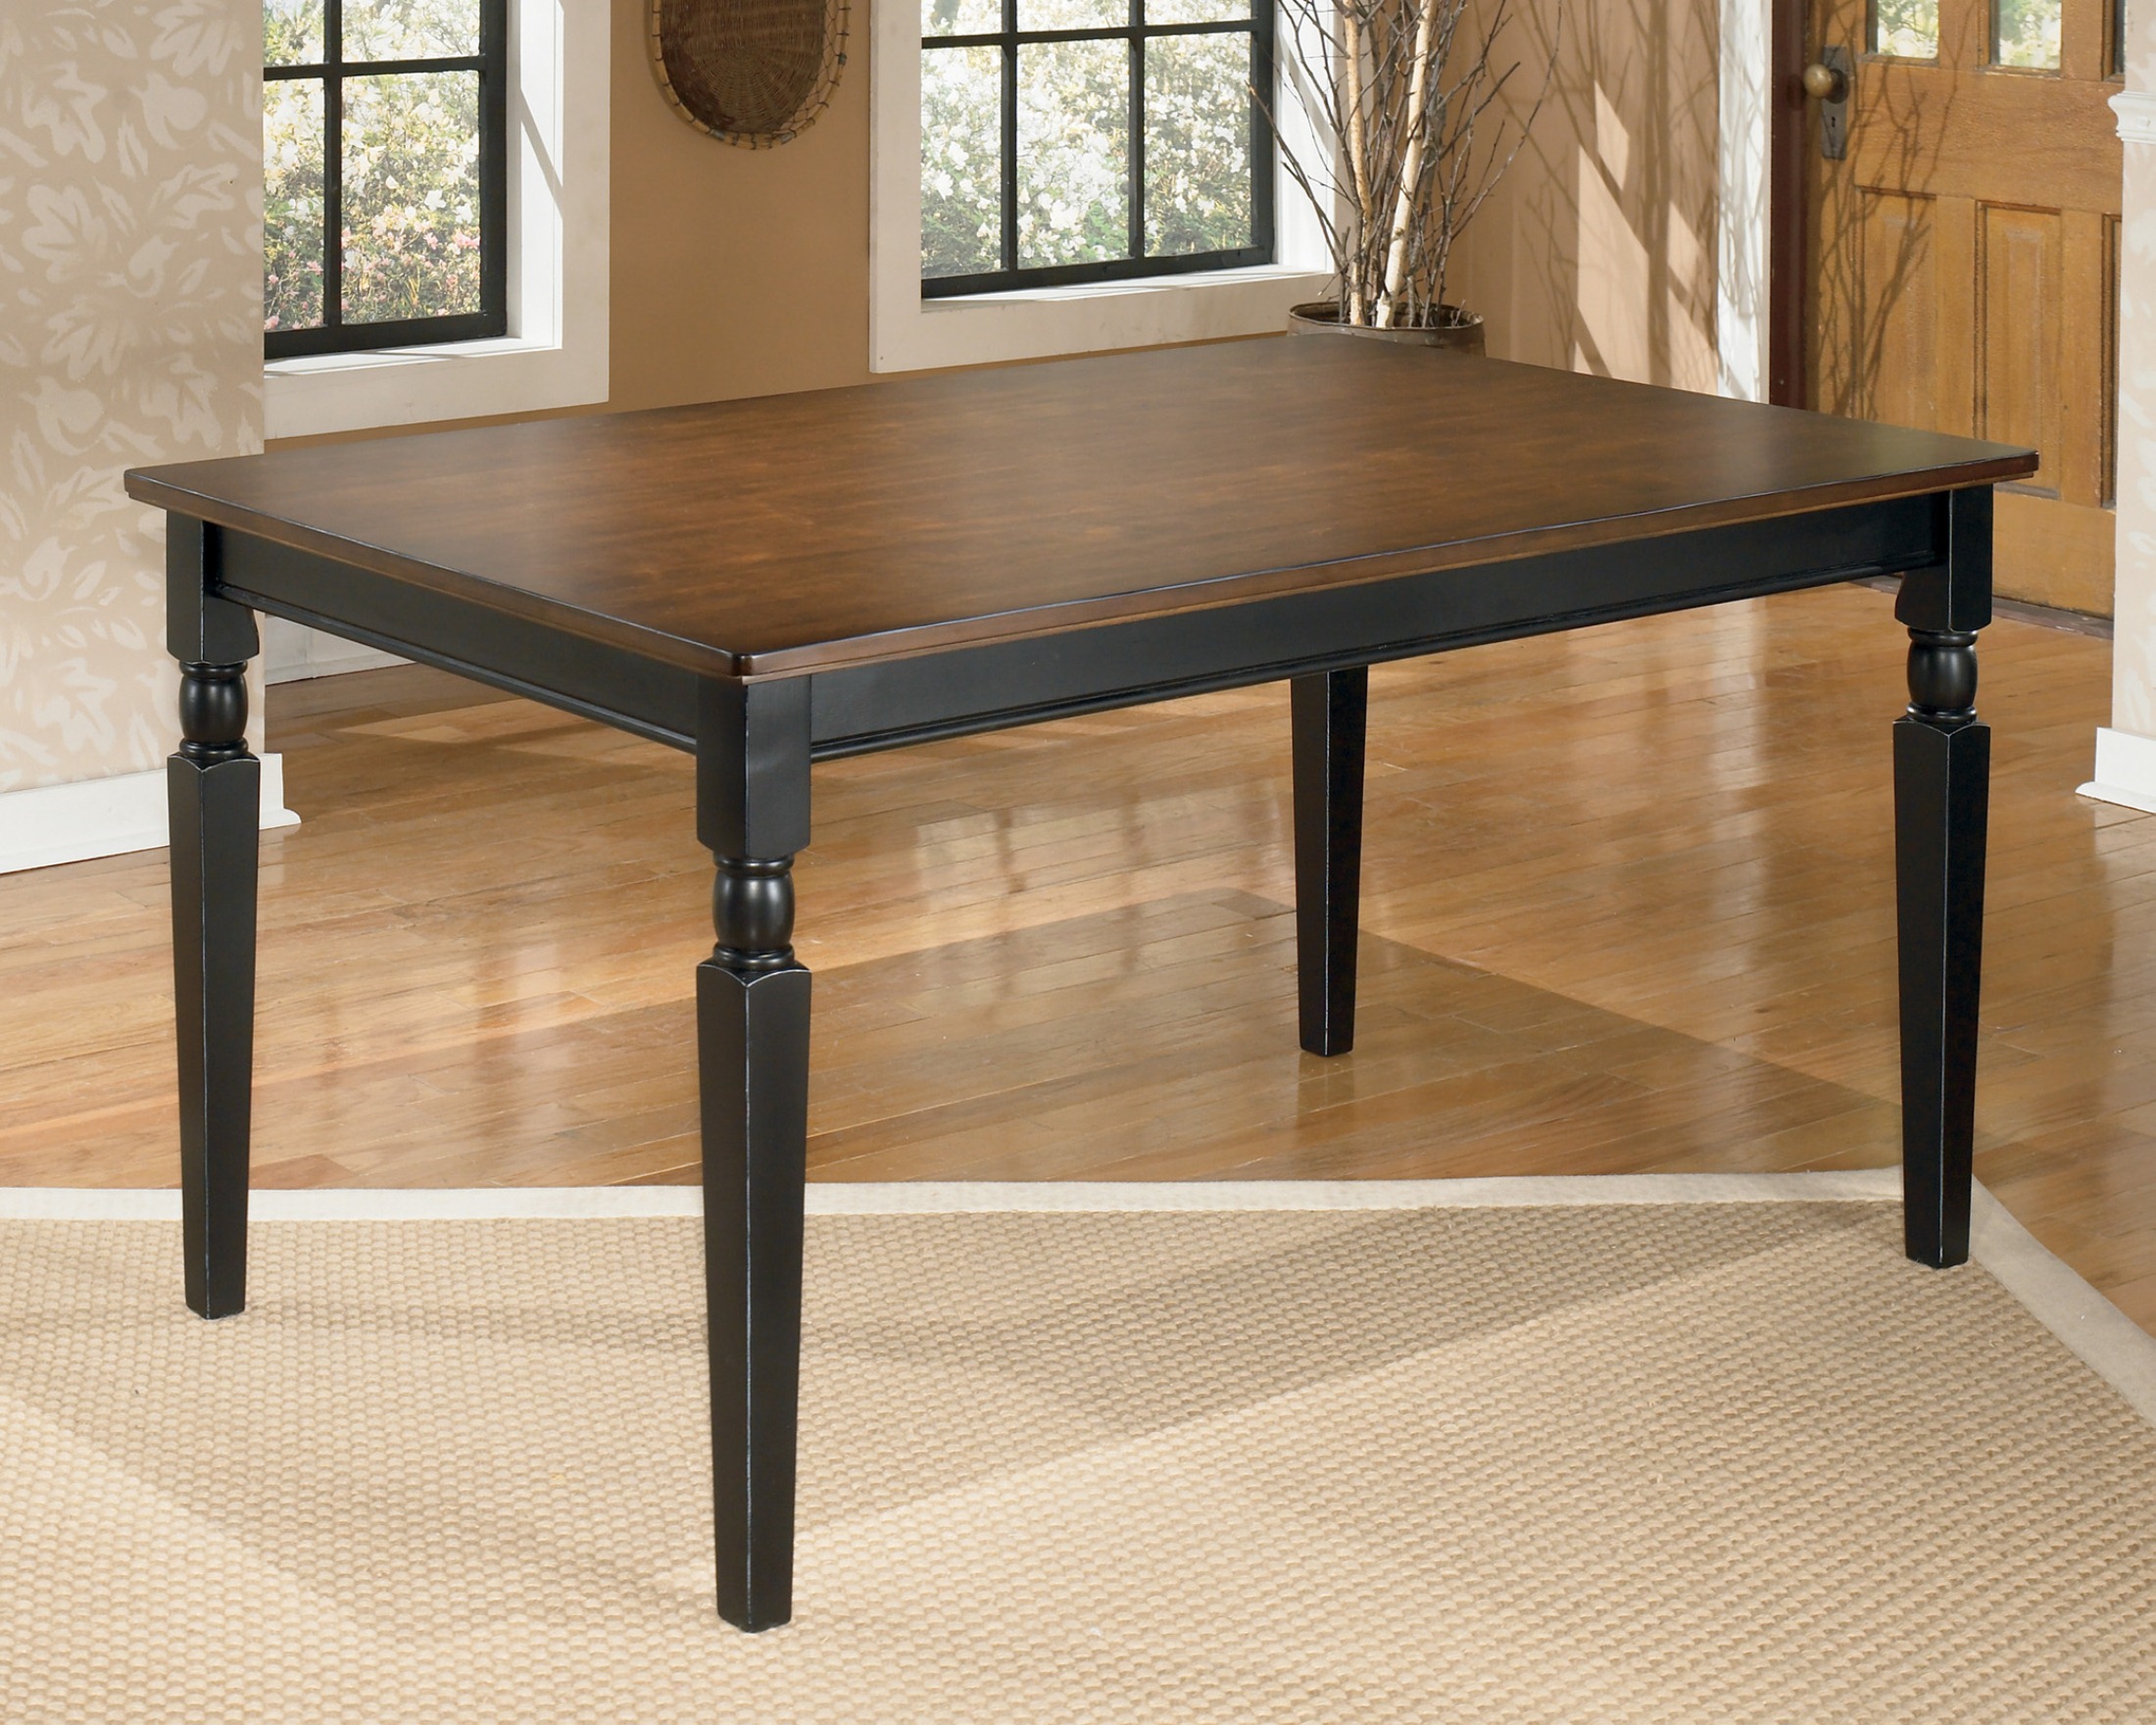 owingsville round dining room table